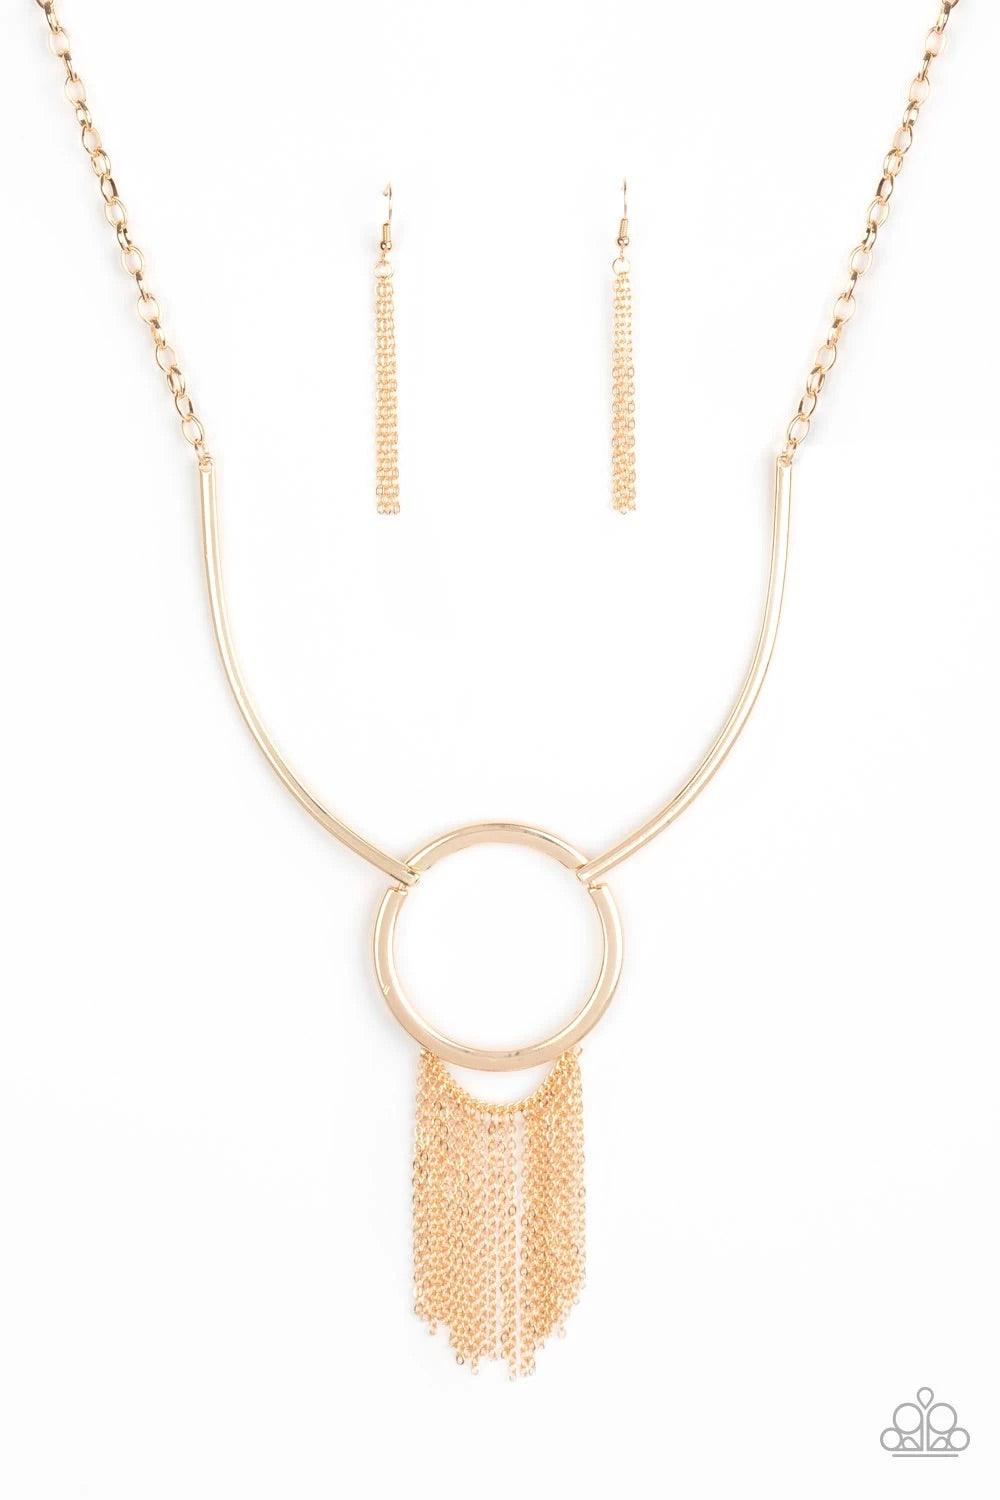 Paparazzi Accessories Pharaoh Paradise - Gold Attached to two bowing gold bars, a shiny gold hoop gives way to a shimmery gold chain fringe, creating a statement making look below the collar. Features an adjustable clasp closure. Sold as one individual ne